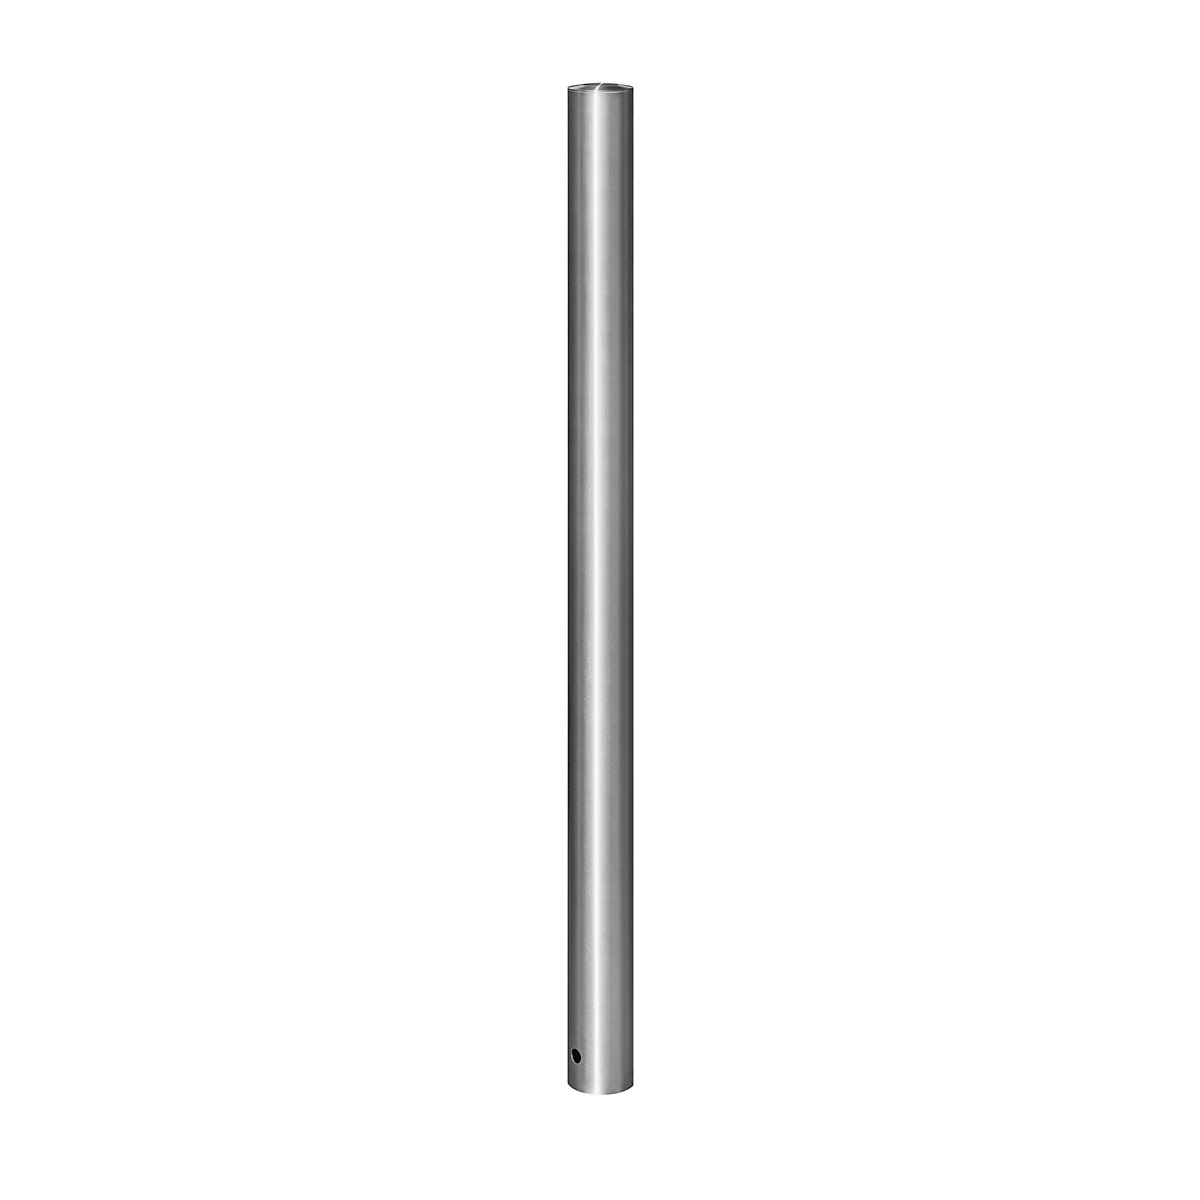 Stainless steel barrier post, with flat head, for concreting in with floor anchor, Ø 76 mm